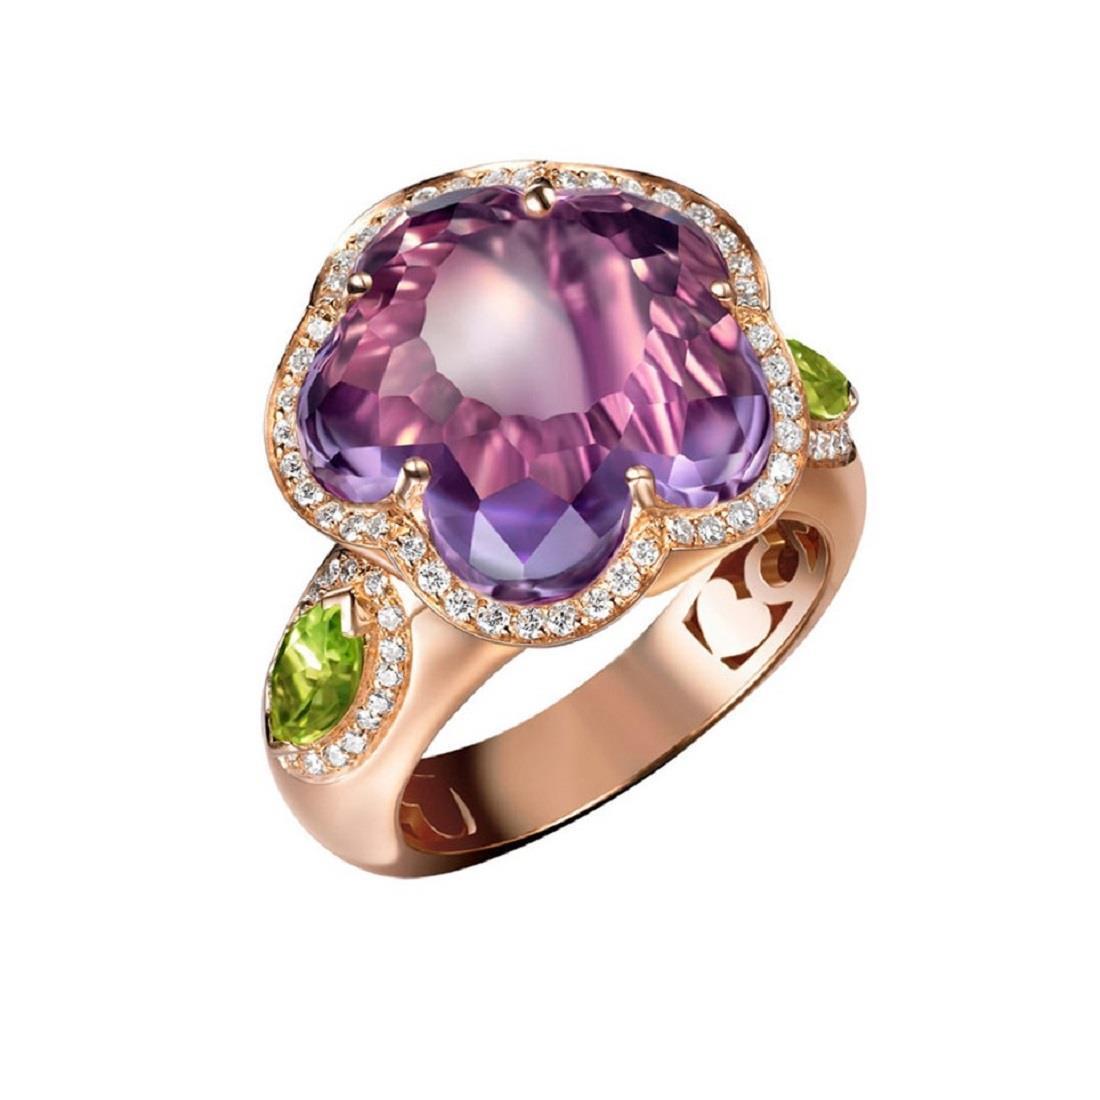 Bon Ton flower ring in red gold with diamonds, amethyst and peridot - PASQUALE BRUNI